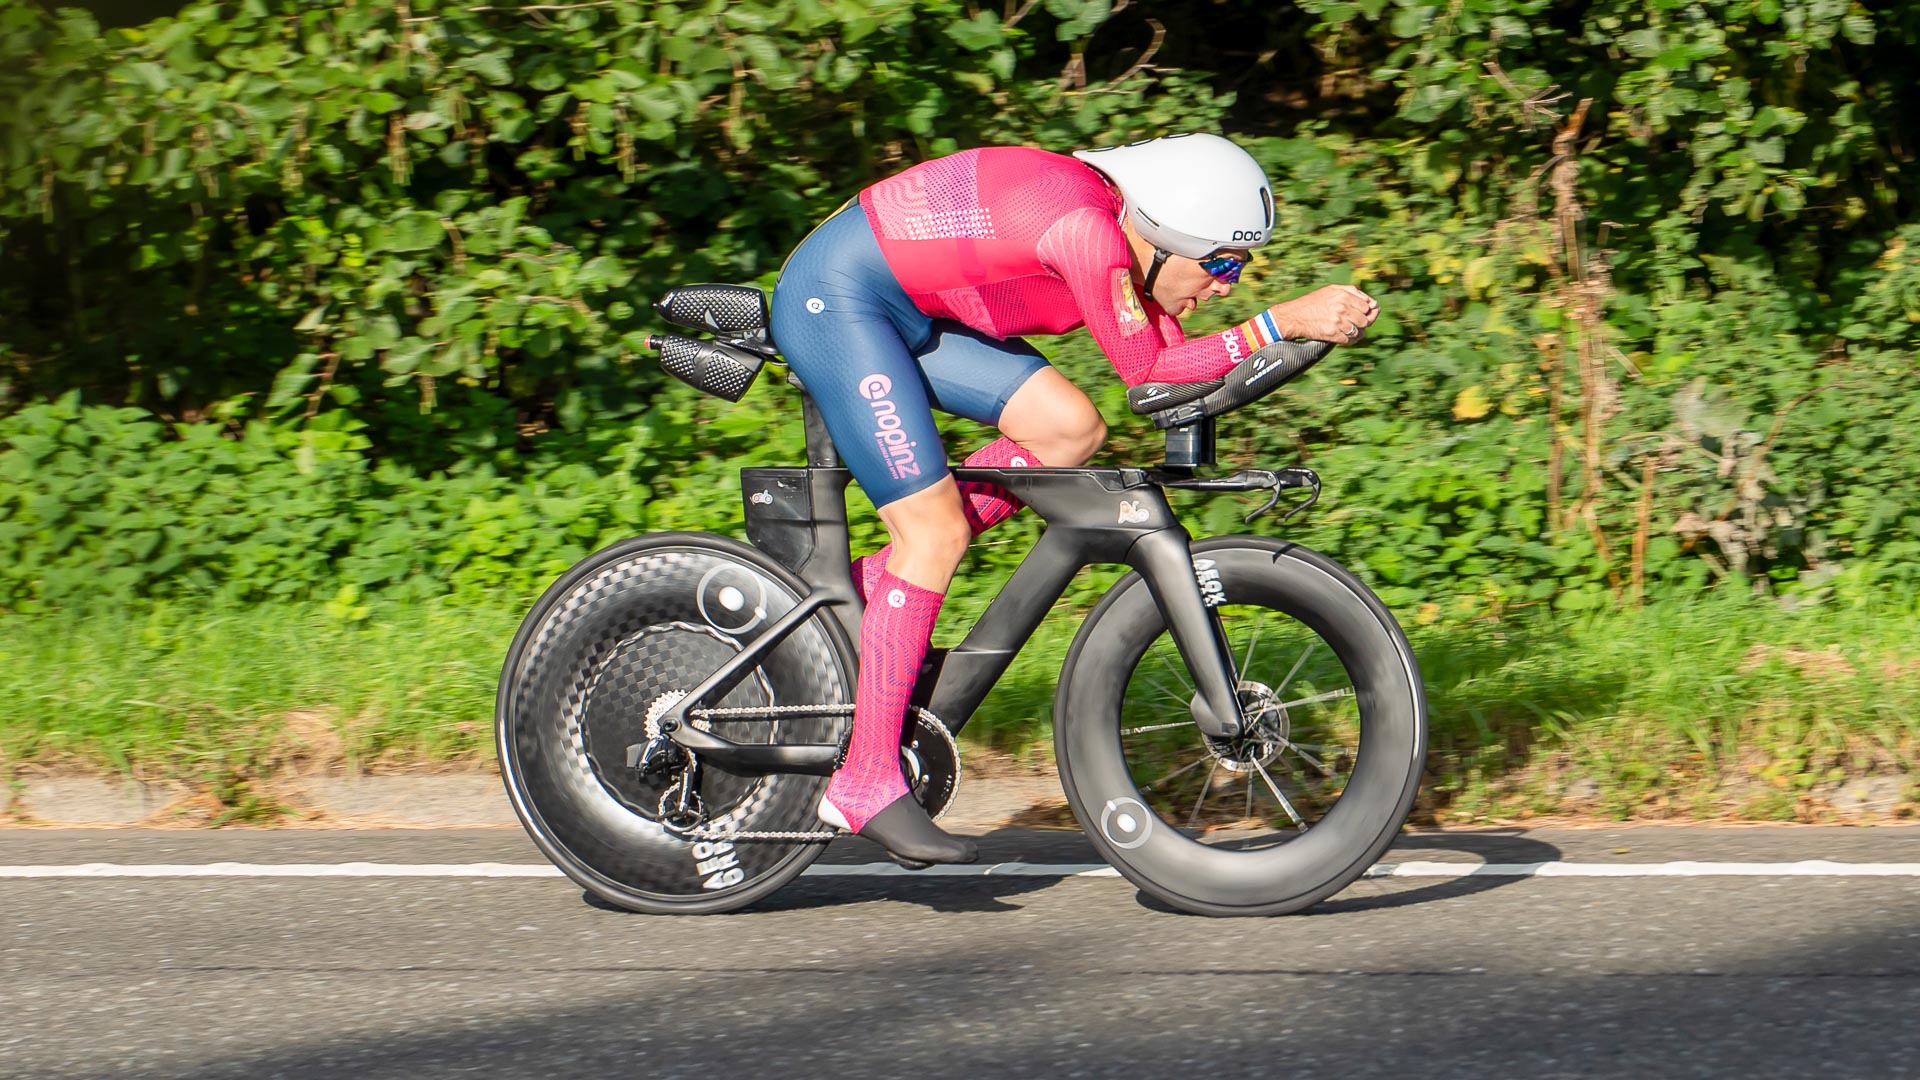 The photo shows Alex Dowsett in a time trial position